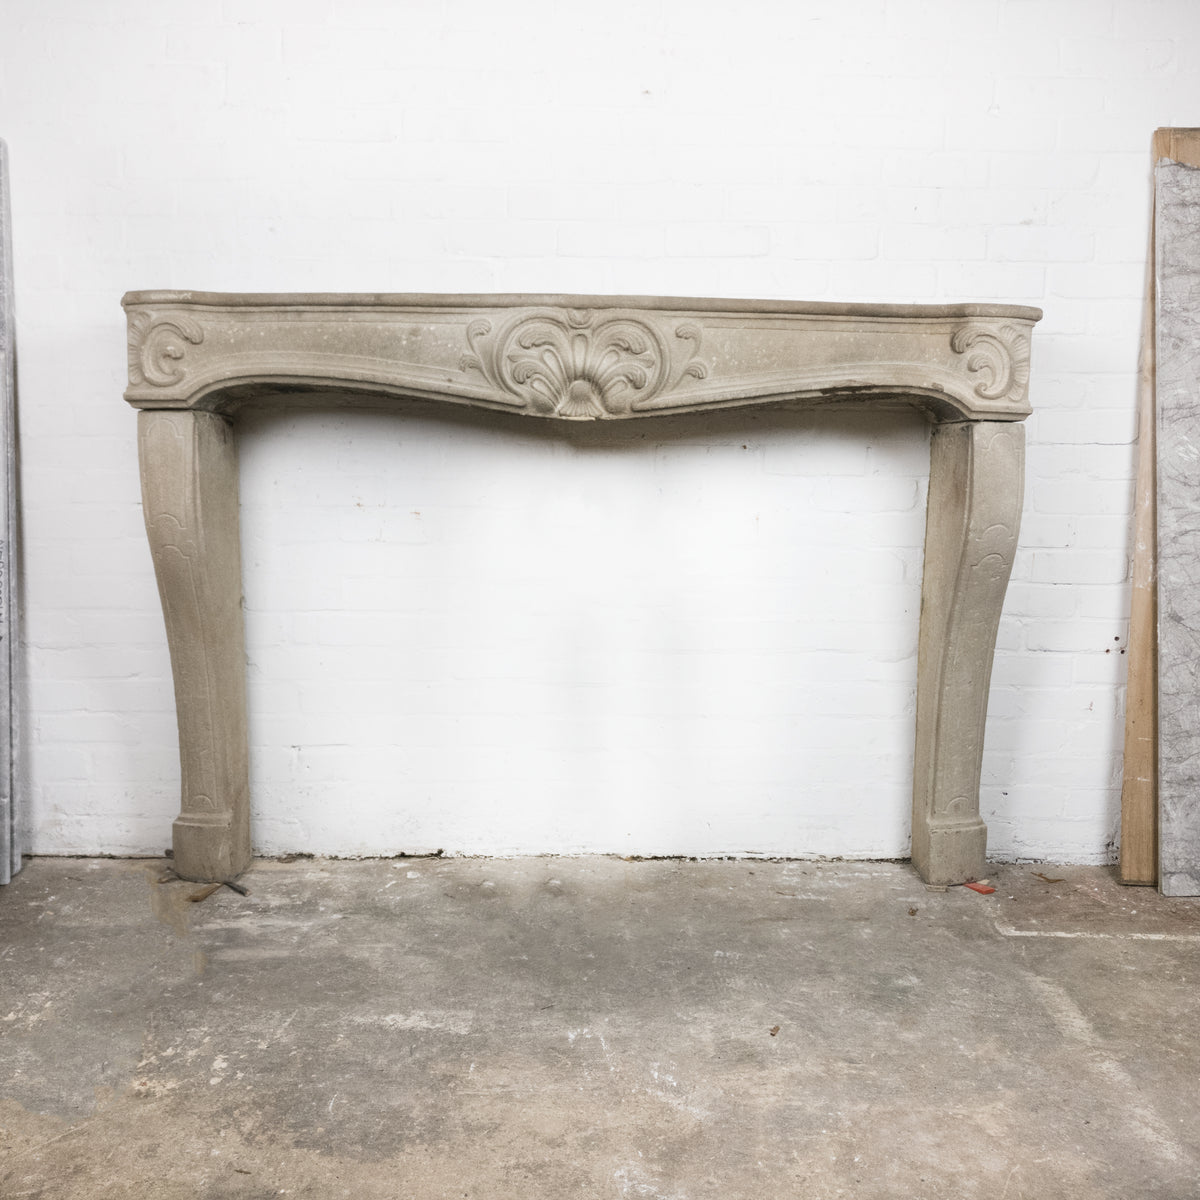 Spectacular Antique 19th Century Stone Fireplace Surround Louis XV | The Architectural Forum